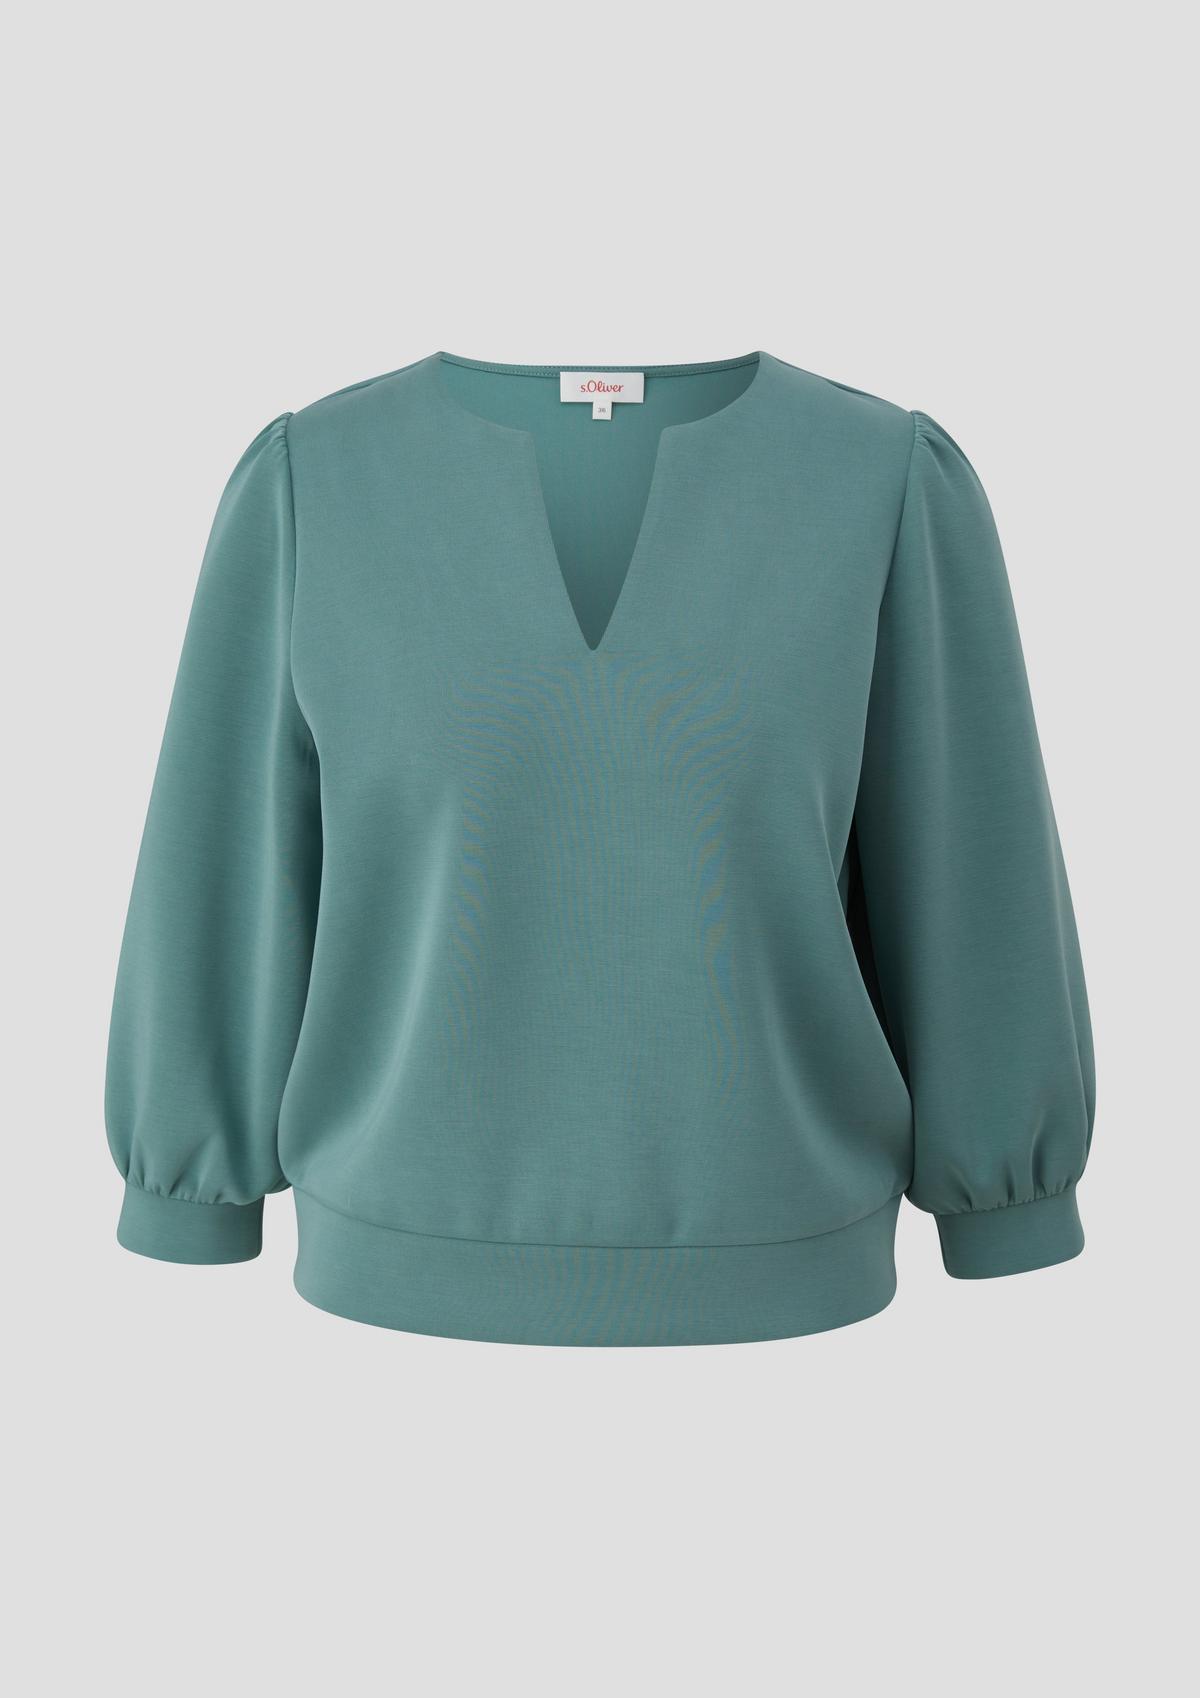 s.Oliver Long sleeve top with a notch neckline